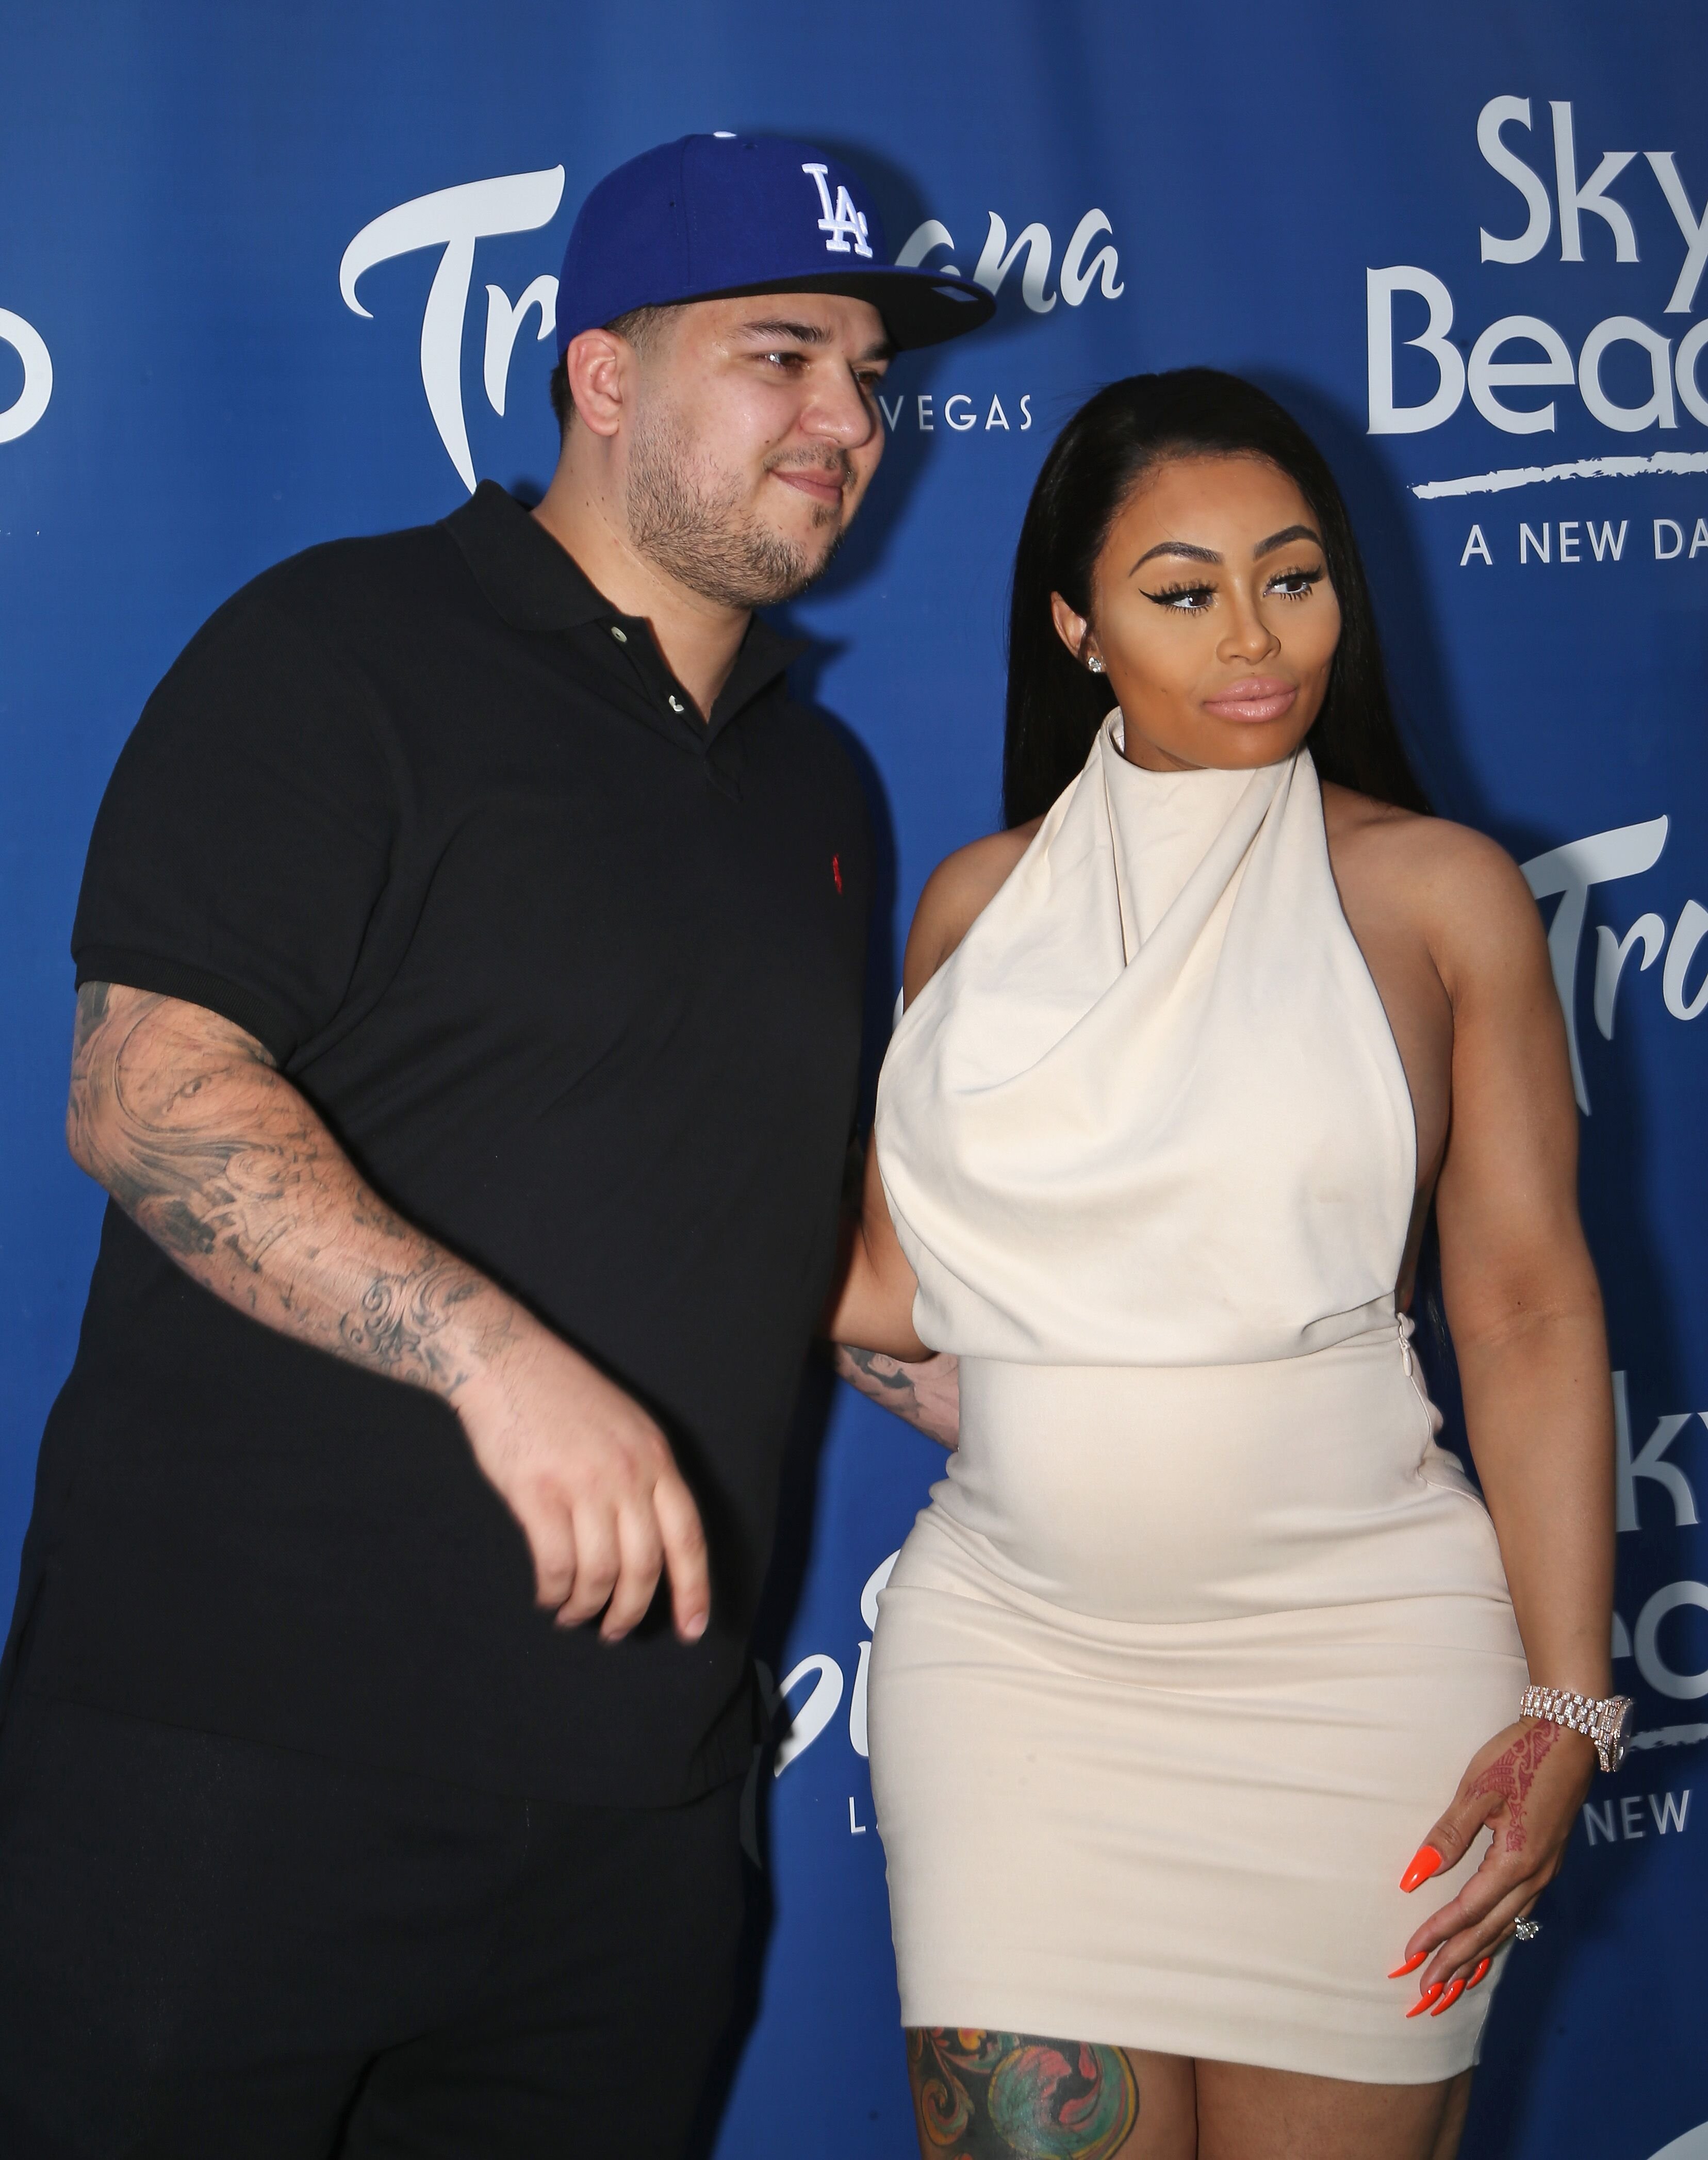 Television personality Rob Kardashian (L) and model Blac Chyna at the Sky Beach Club at the Tropicana Las Vegas on May 28, 2016 in Las Vegas, Nevada | Photo: Getty Images